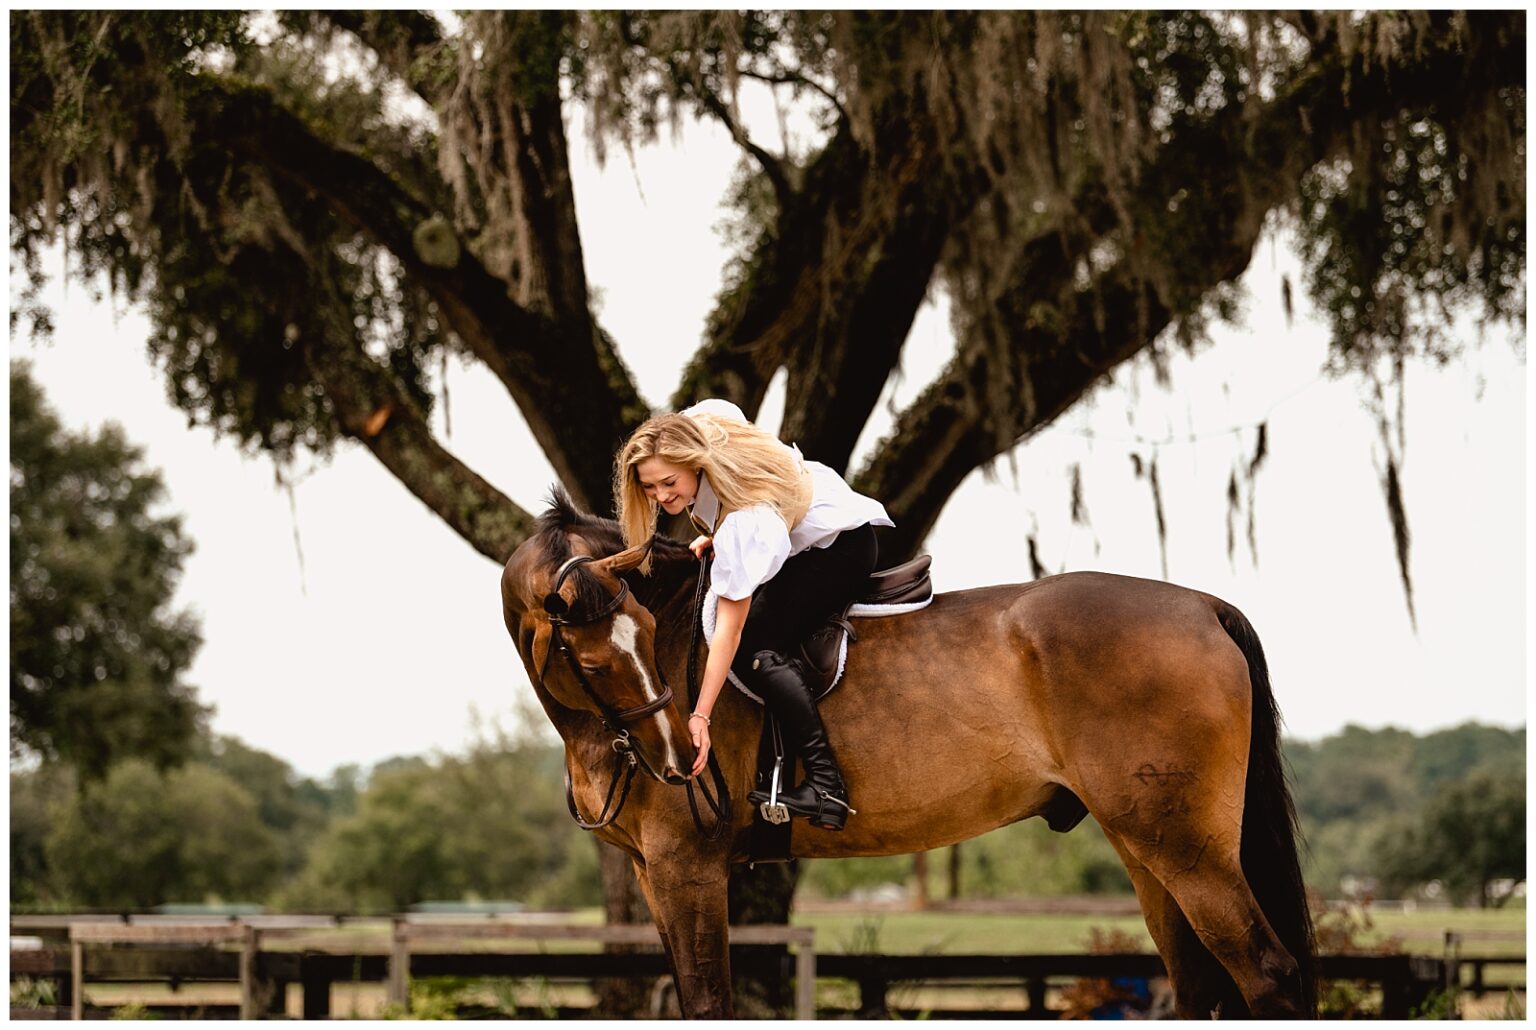 Ocala photoshoot with Horse and Rider. Under saddle photos of hunter/jumper and equitation horse. Equestrian styled outfit with blouse from Odette Boutique.